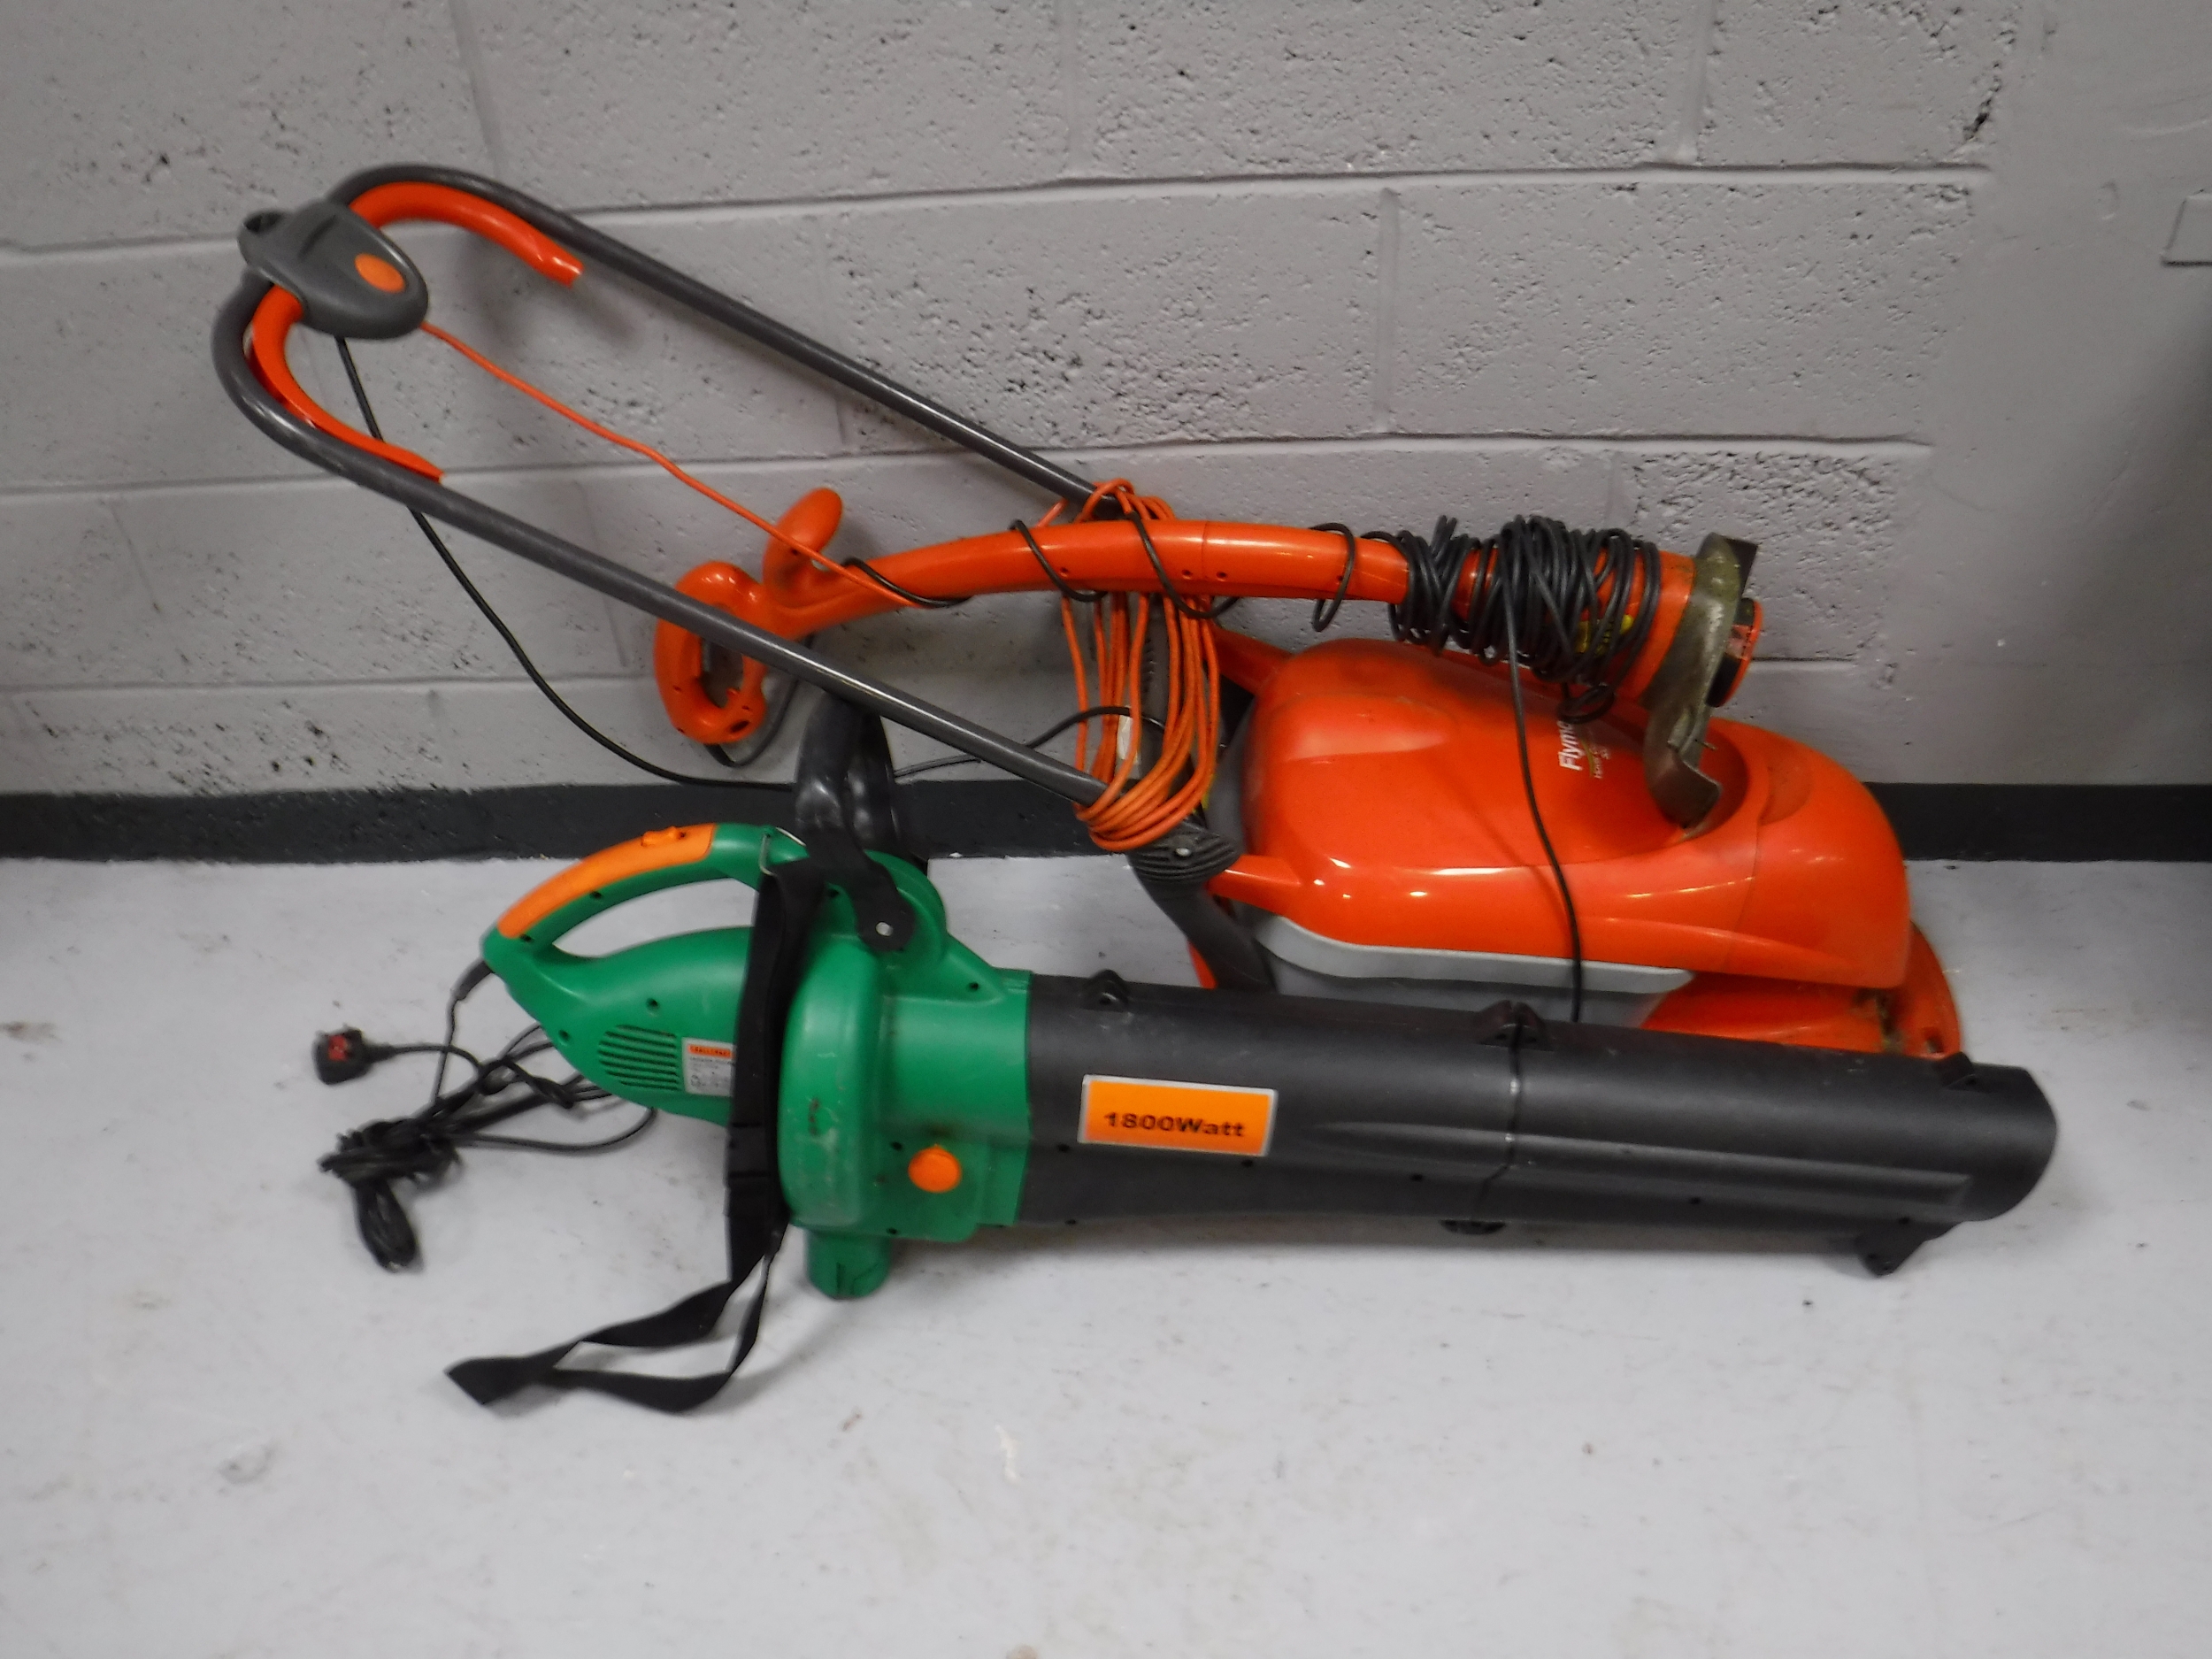 A Flymo electric strimmer and mower together with a garden vac and boxed hammock